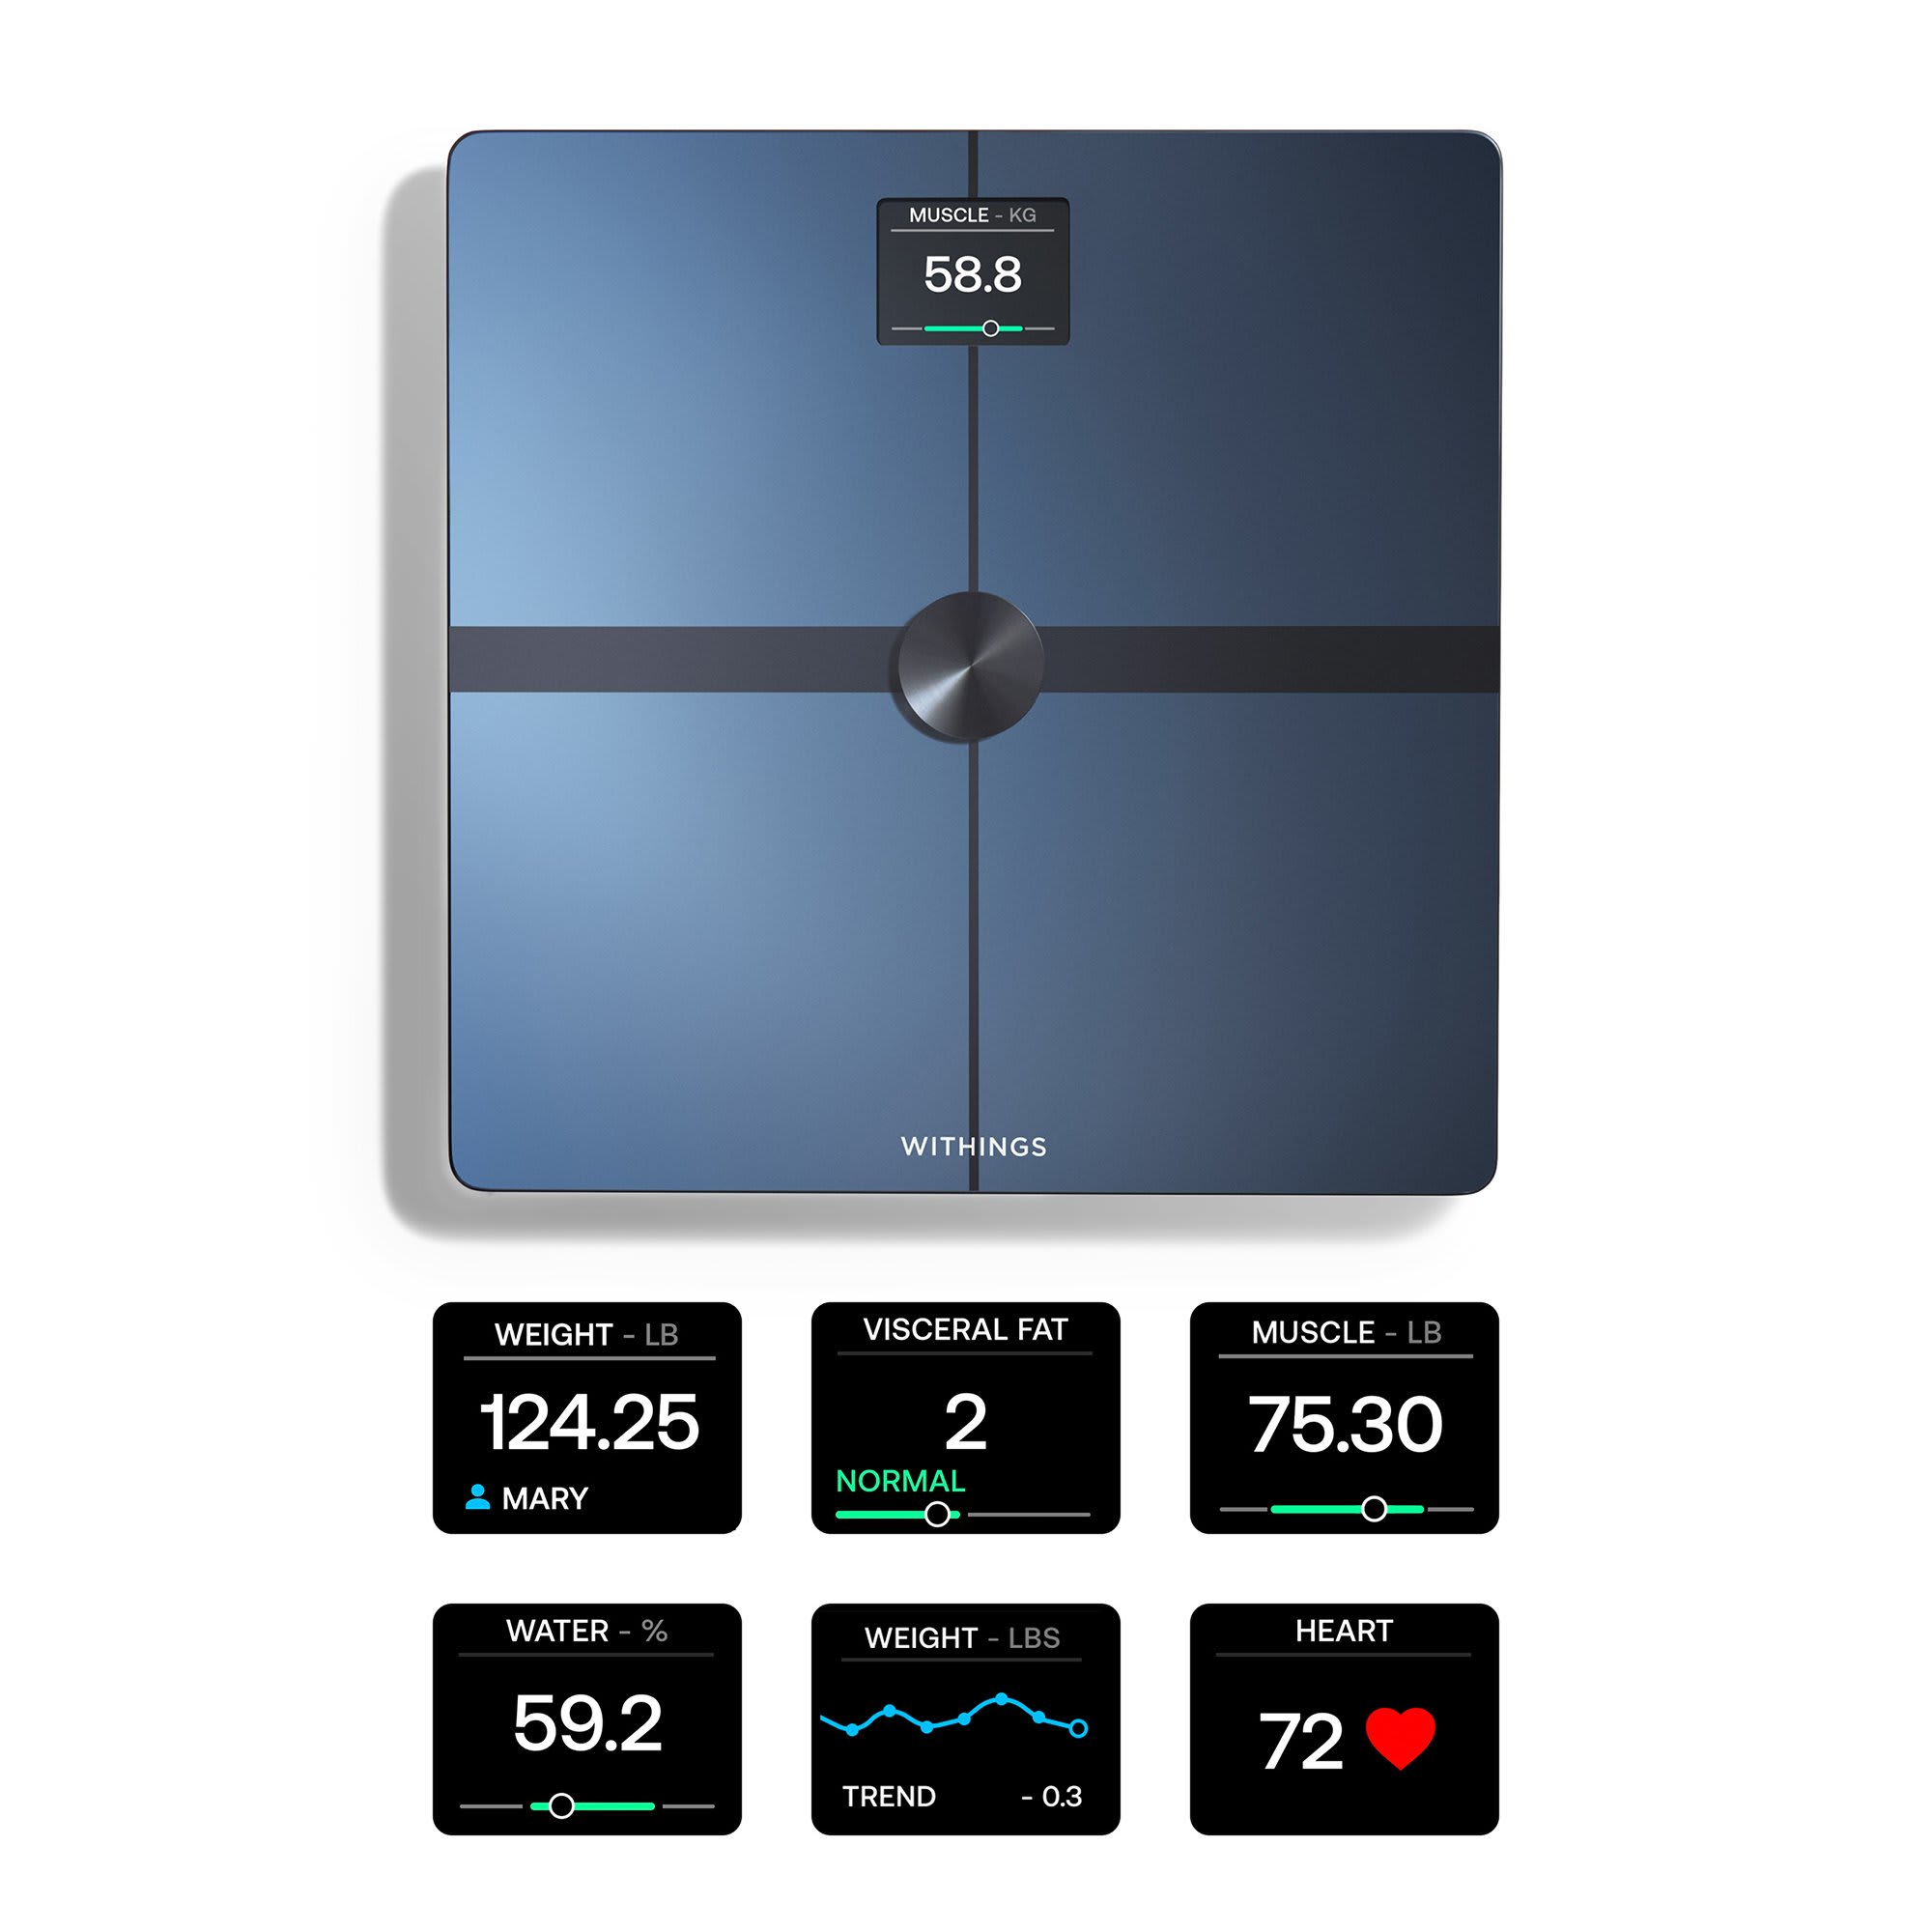 Withings Body Smart Advanced Body Composition Smart Wi-Fi Scale - Black